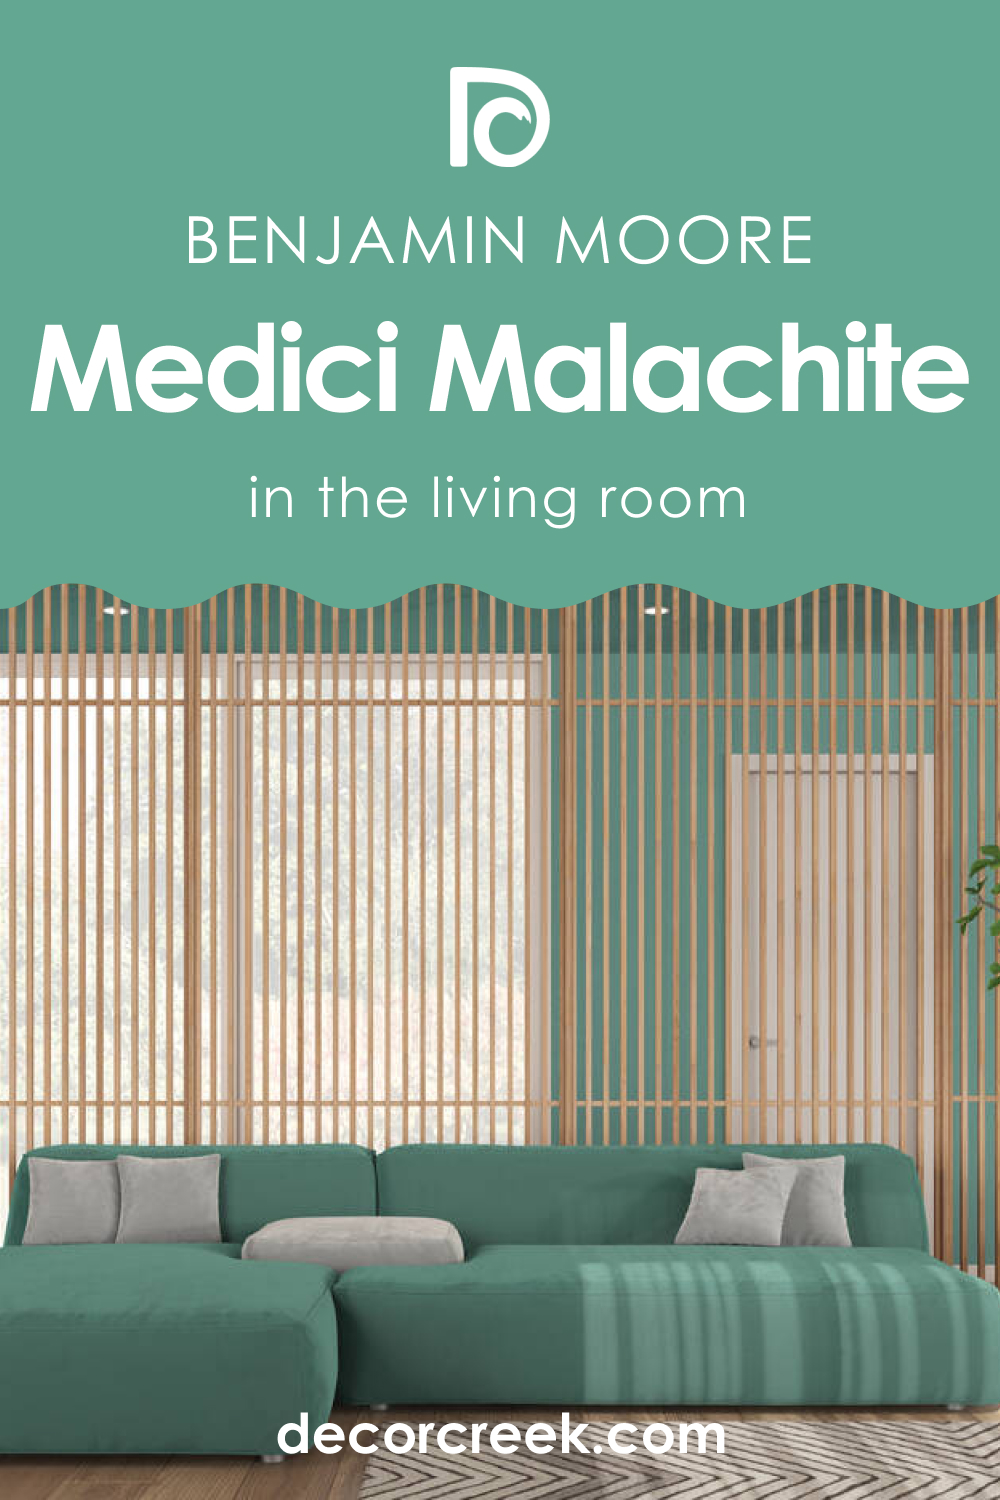 How to Use Medici Malachite 600 in the Living Room?